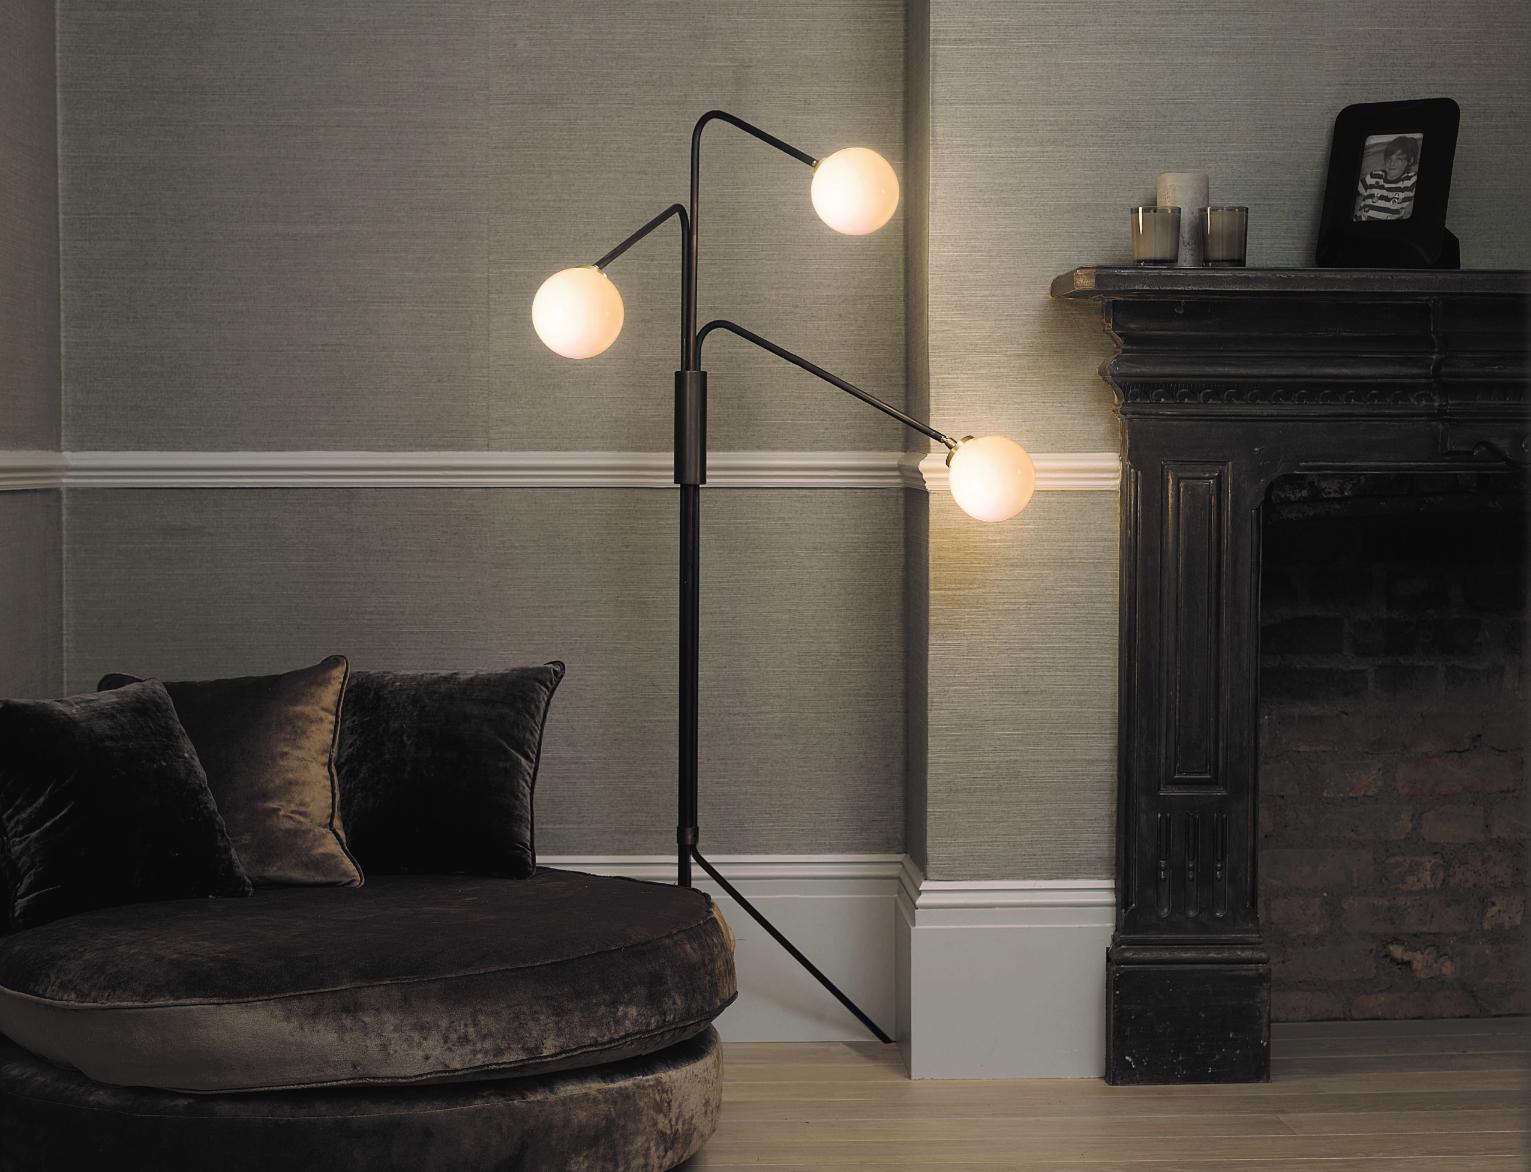 Array opal floor lamp by CTO Lighting
Materials: bronze base with satin brass detail.
Dimensions: W 72.5 x D 60 x H 154 cm 

All our lamps can be wired according to each country. If sold to the USA it will be wired for the USA for